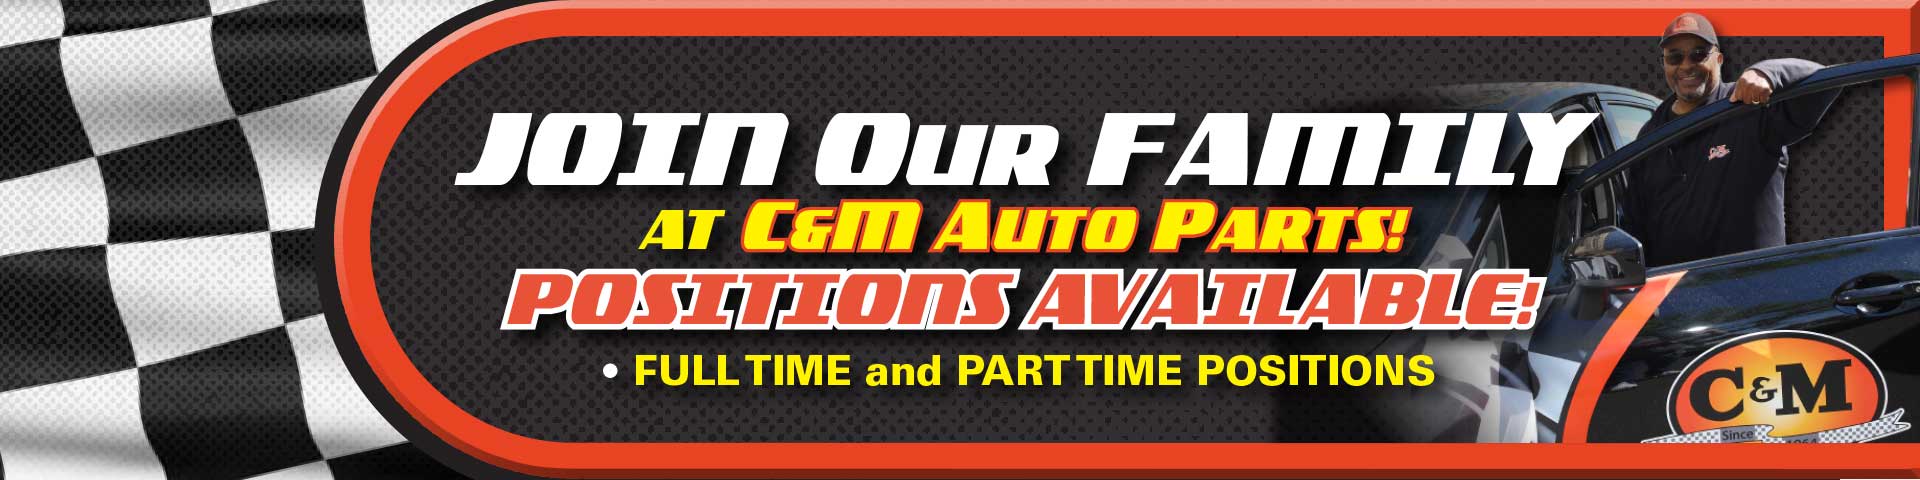 Three C&M Auto Parts associates fulfilling delivery orders, loading deliveries and answering customer telephone calls.